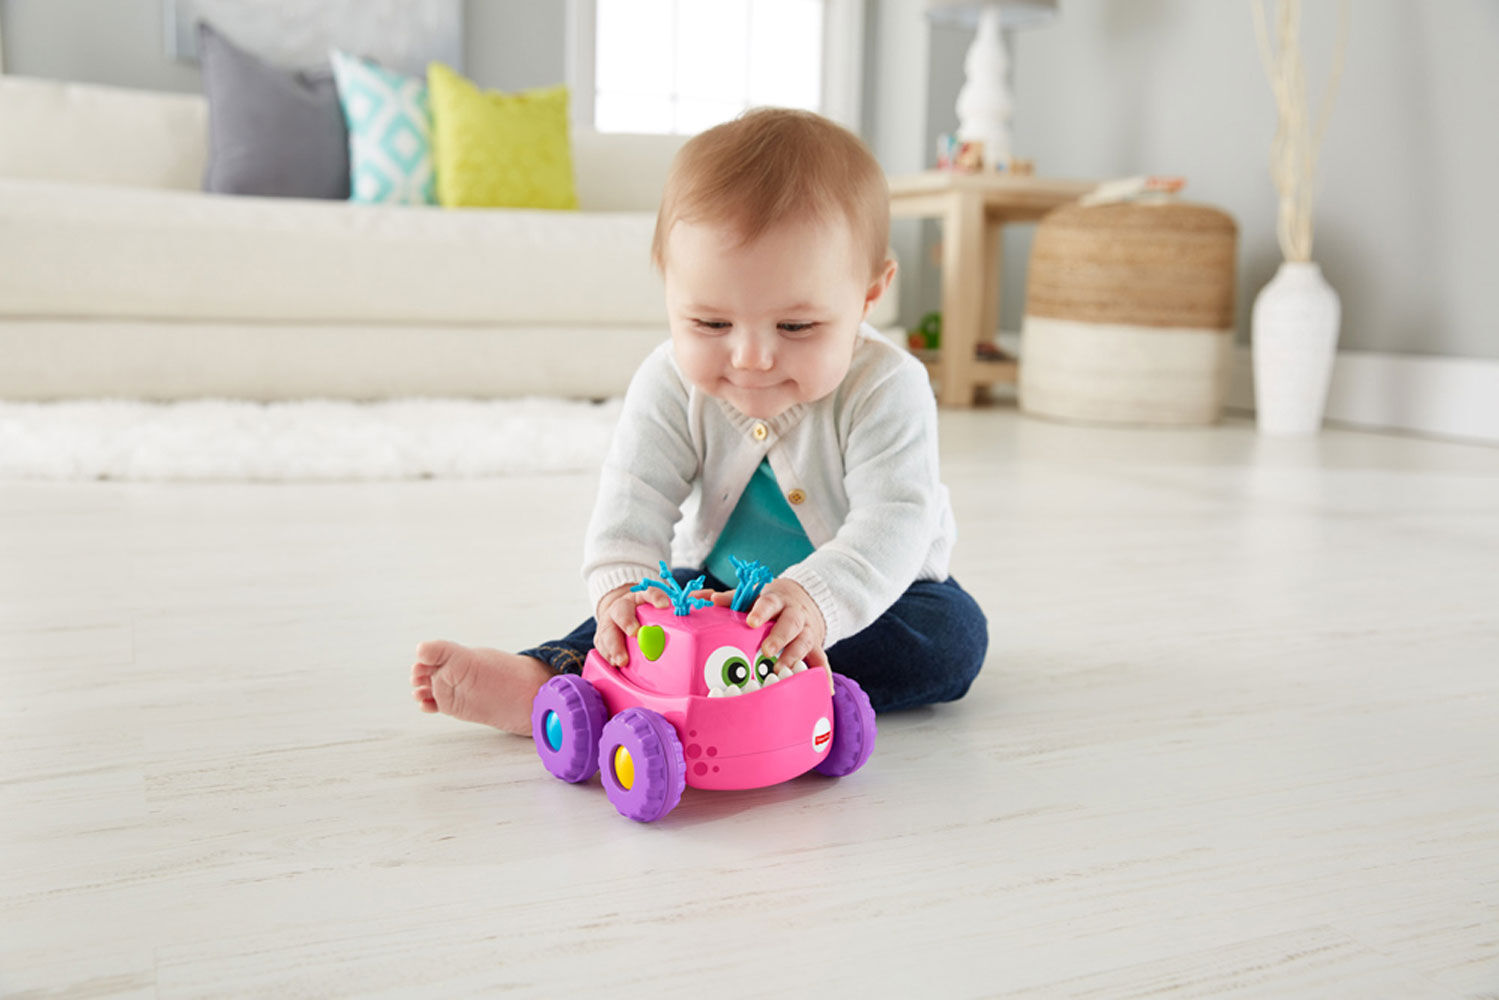 fisher price press n go monster truck pink